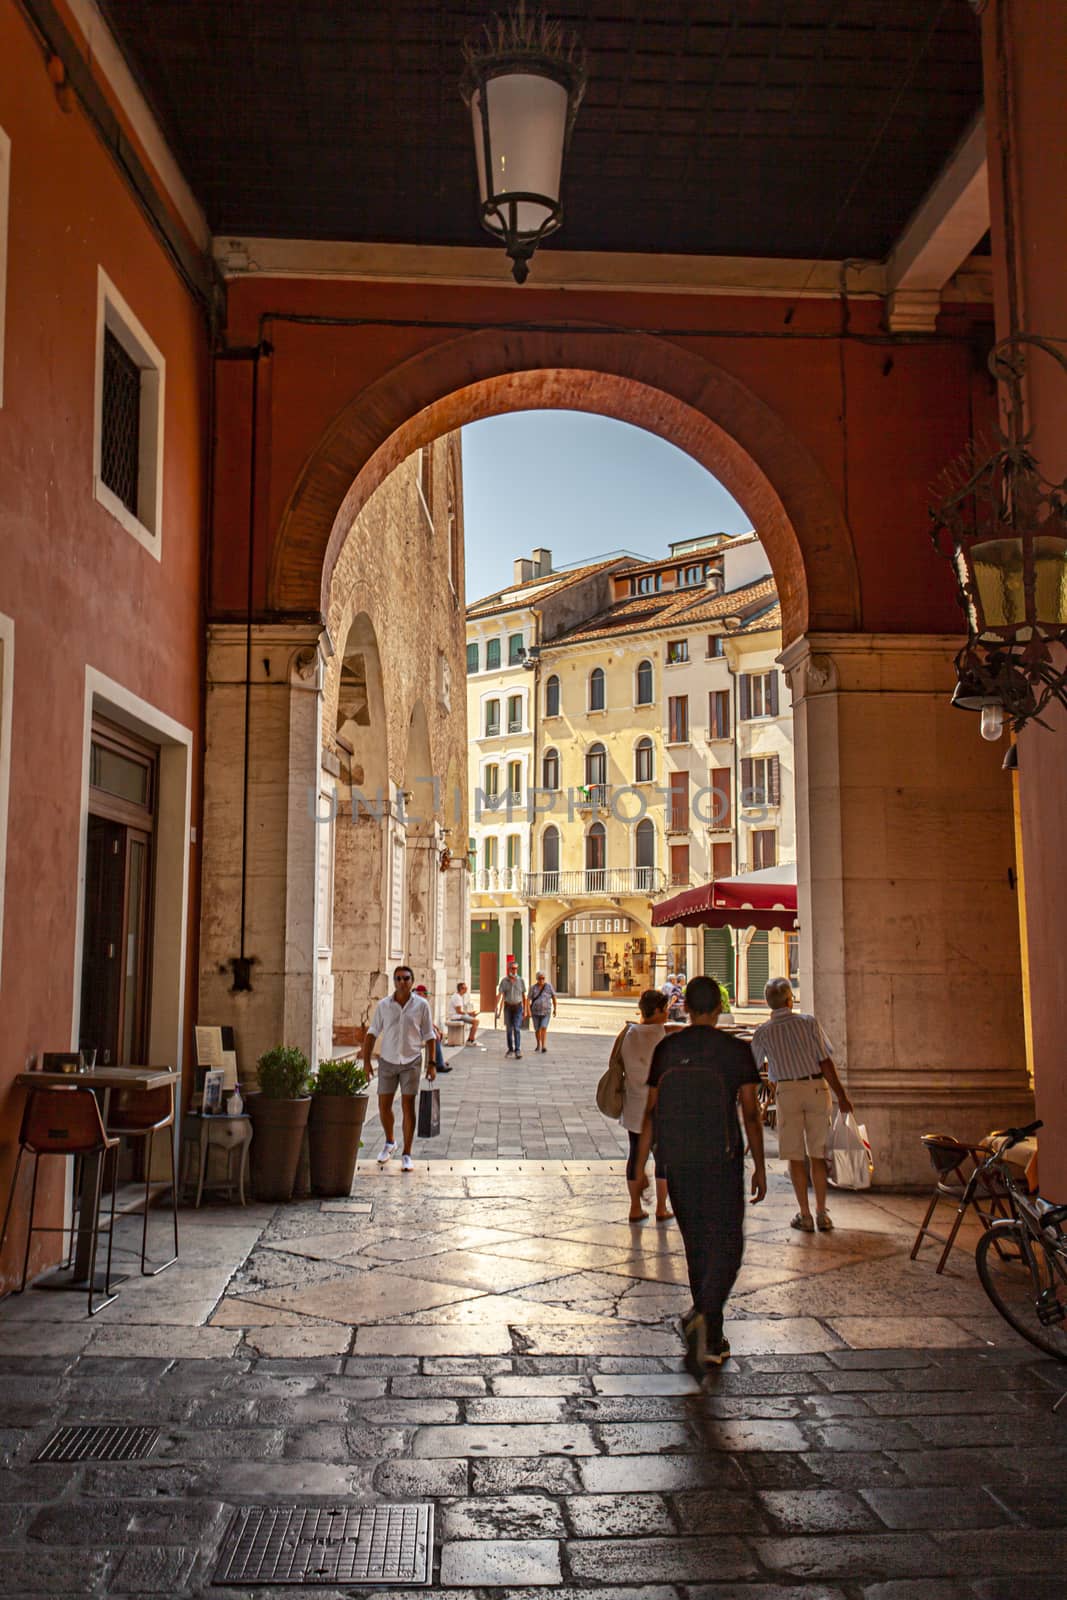 TREVISO, ITALY 13 AUGUST 2020: Arcades in Piazza dei signori in Treviso with people passing through